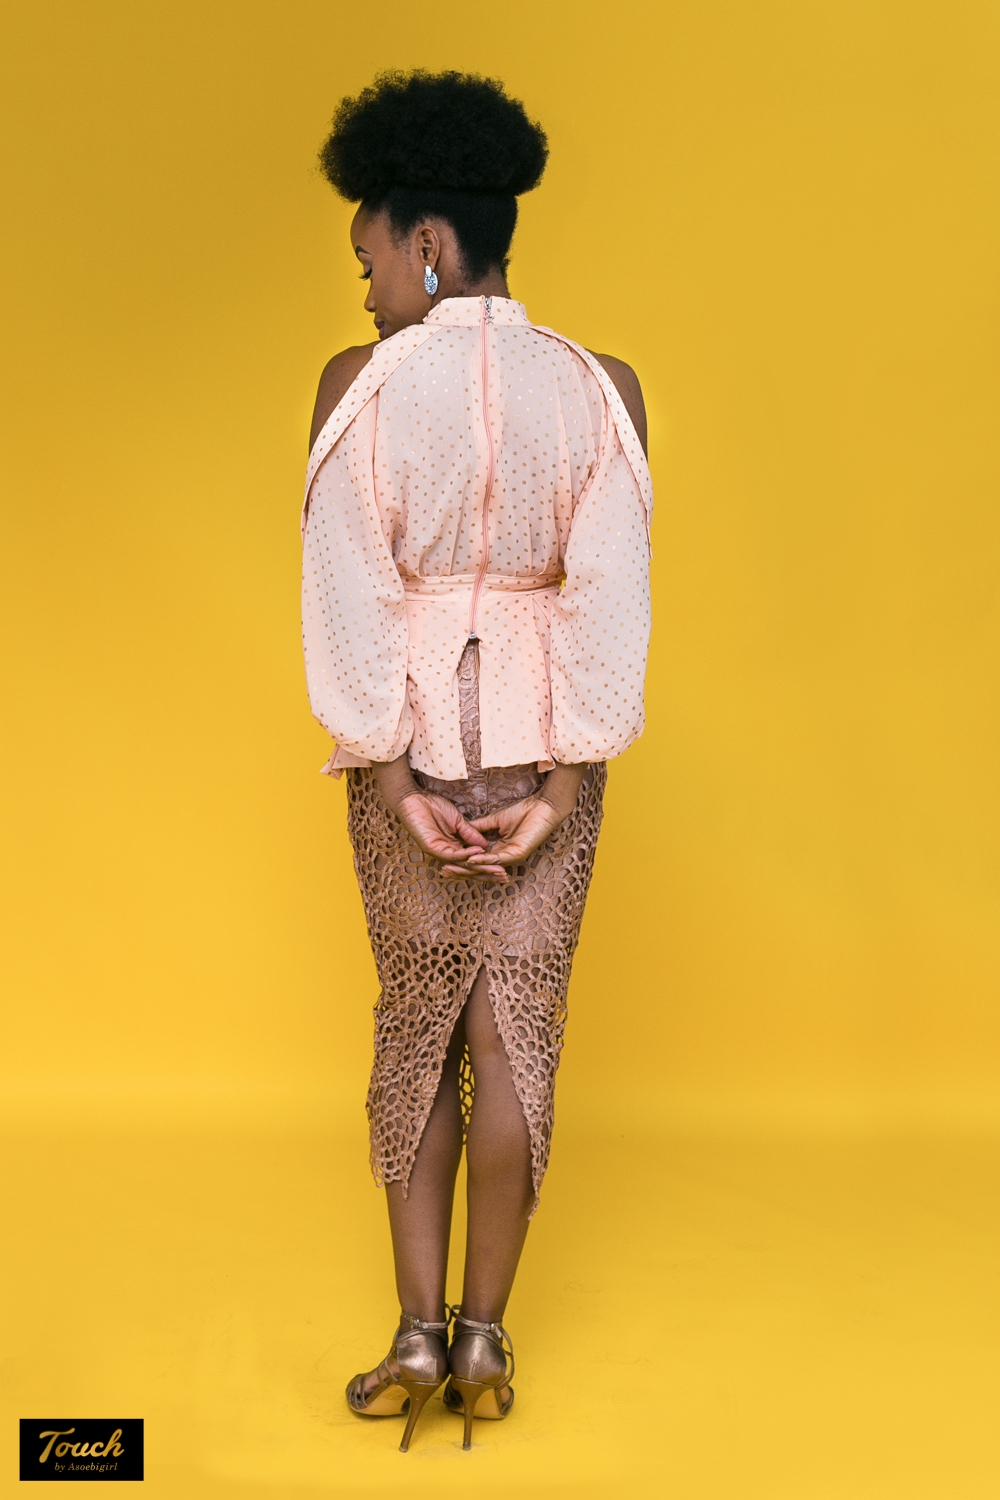 Touch By Asoebigirl Releases New Lookbook Featuring Arese Emokpae Titled “The Touch Woman”